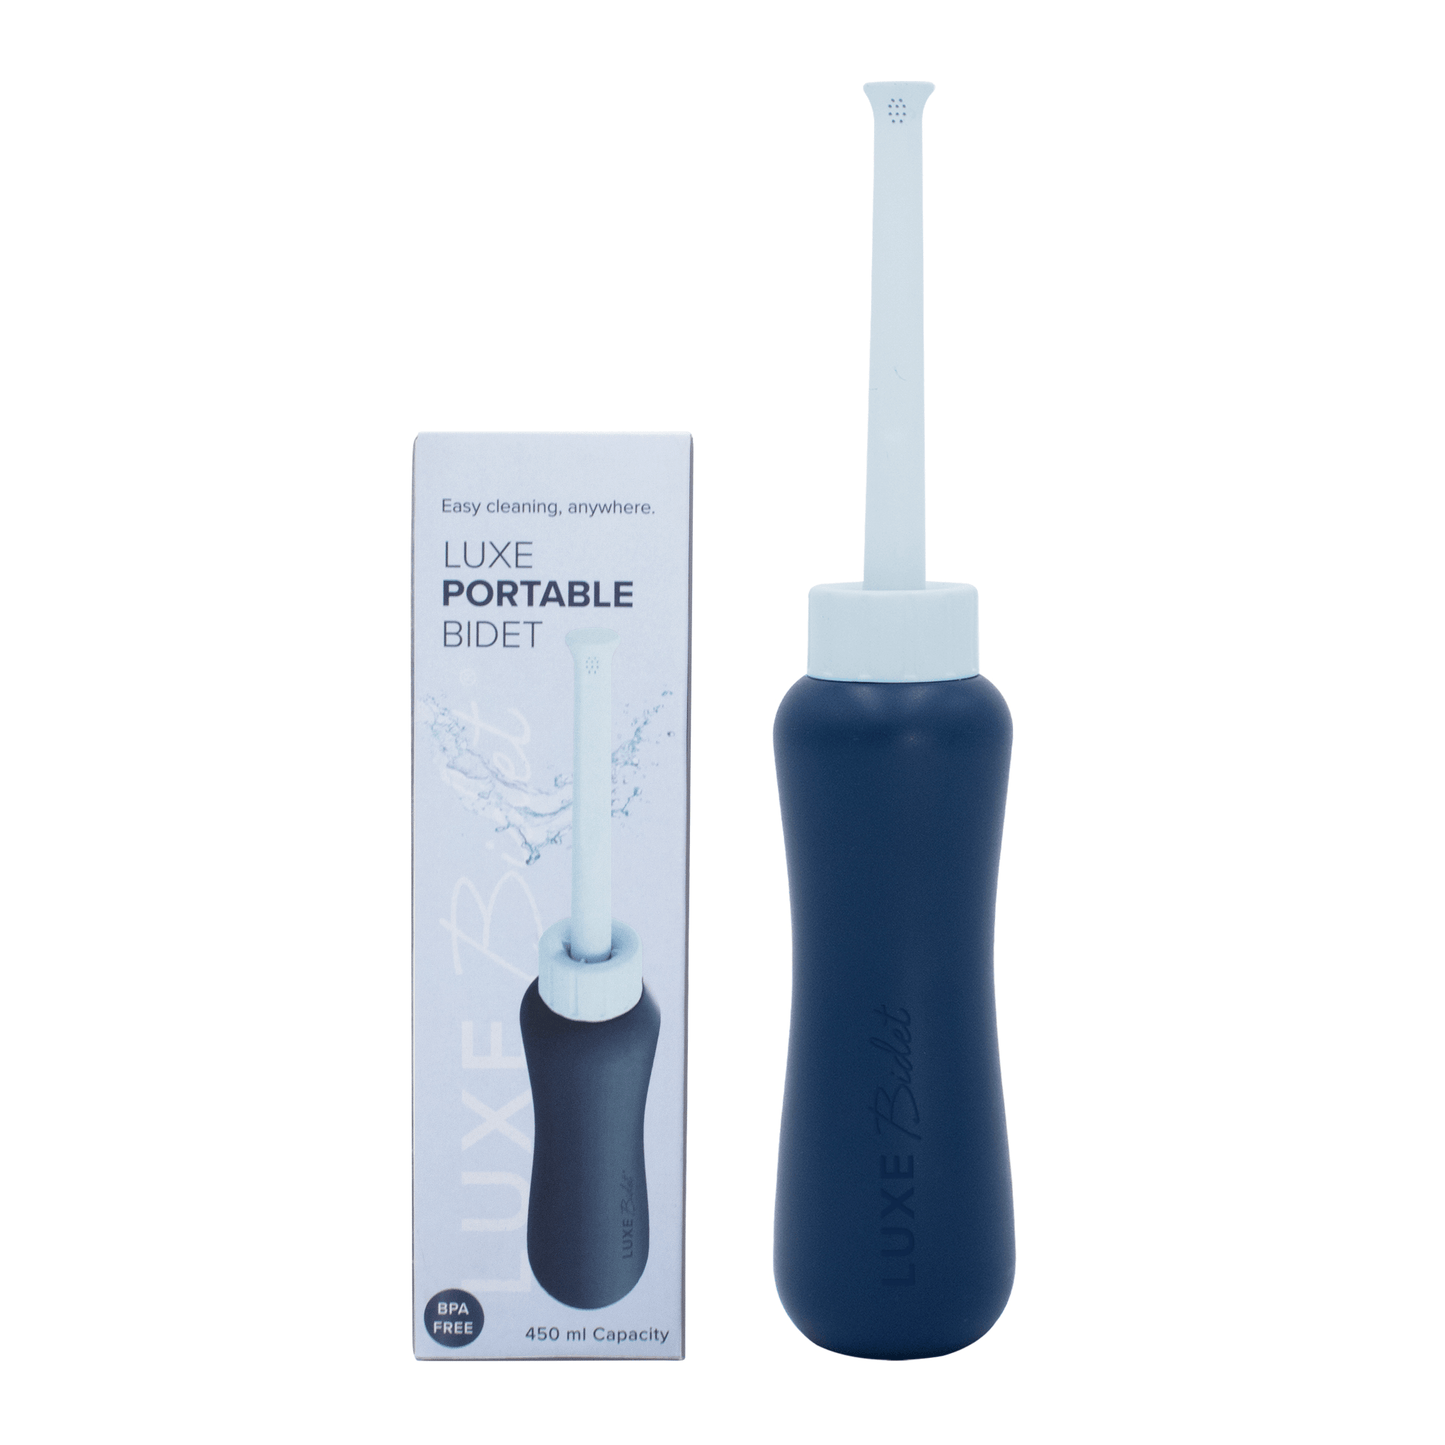 LUXE Portable Bidet has its baby blue nozzle cap extended while standing up next to its packaging